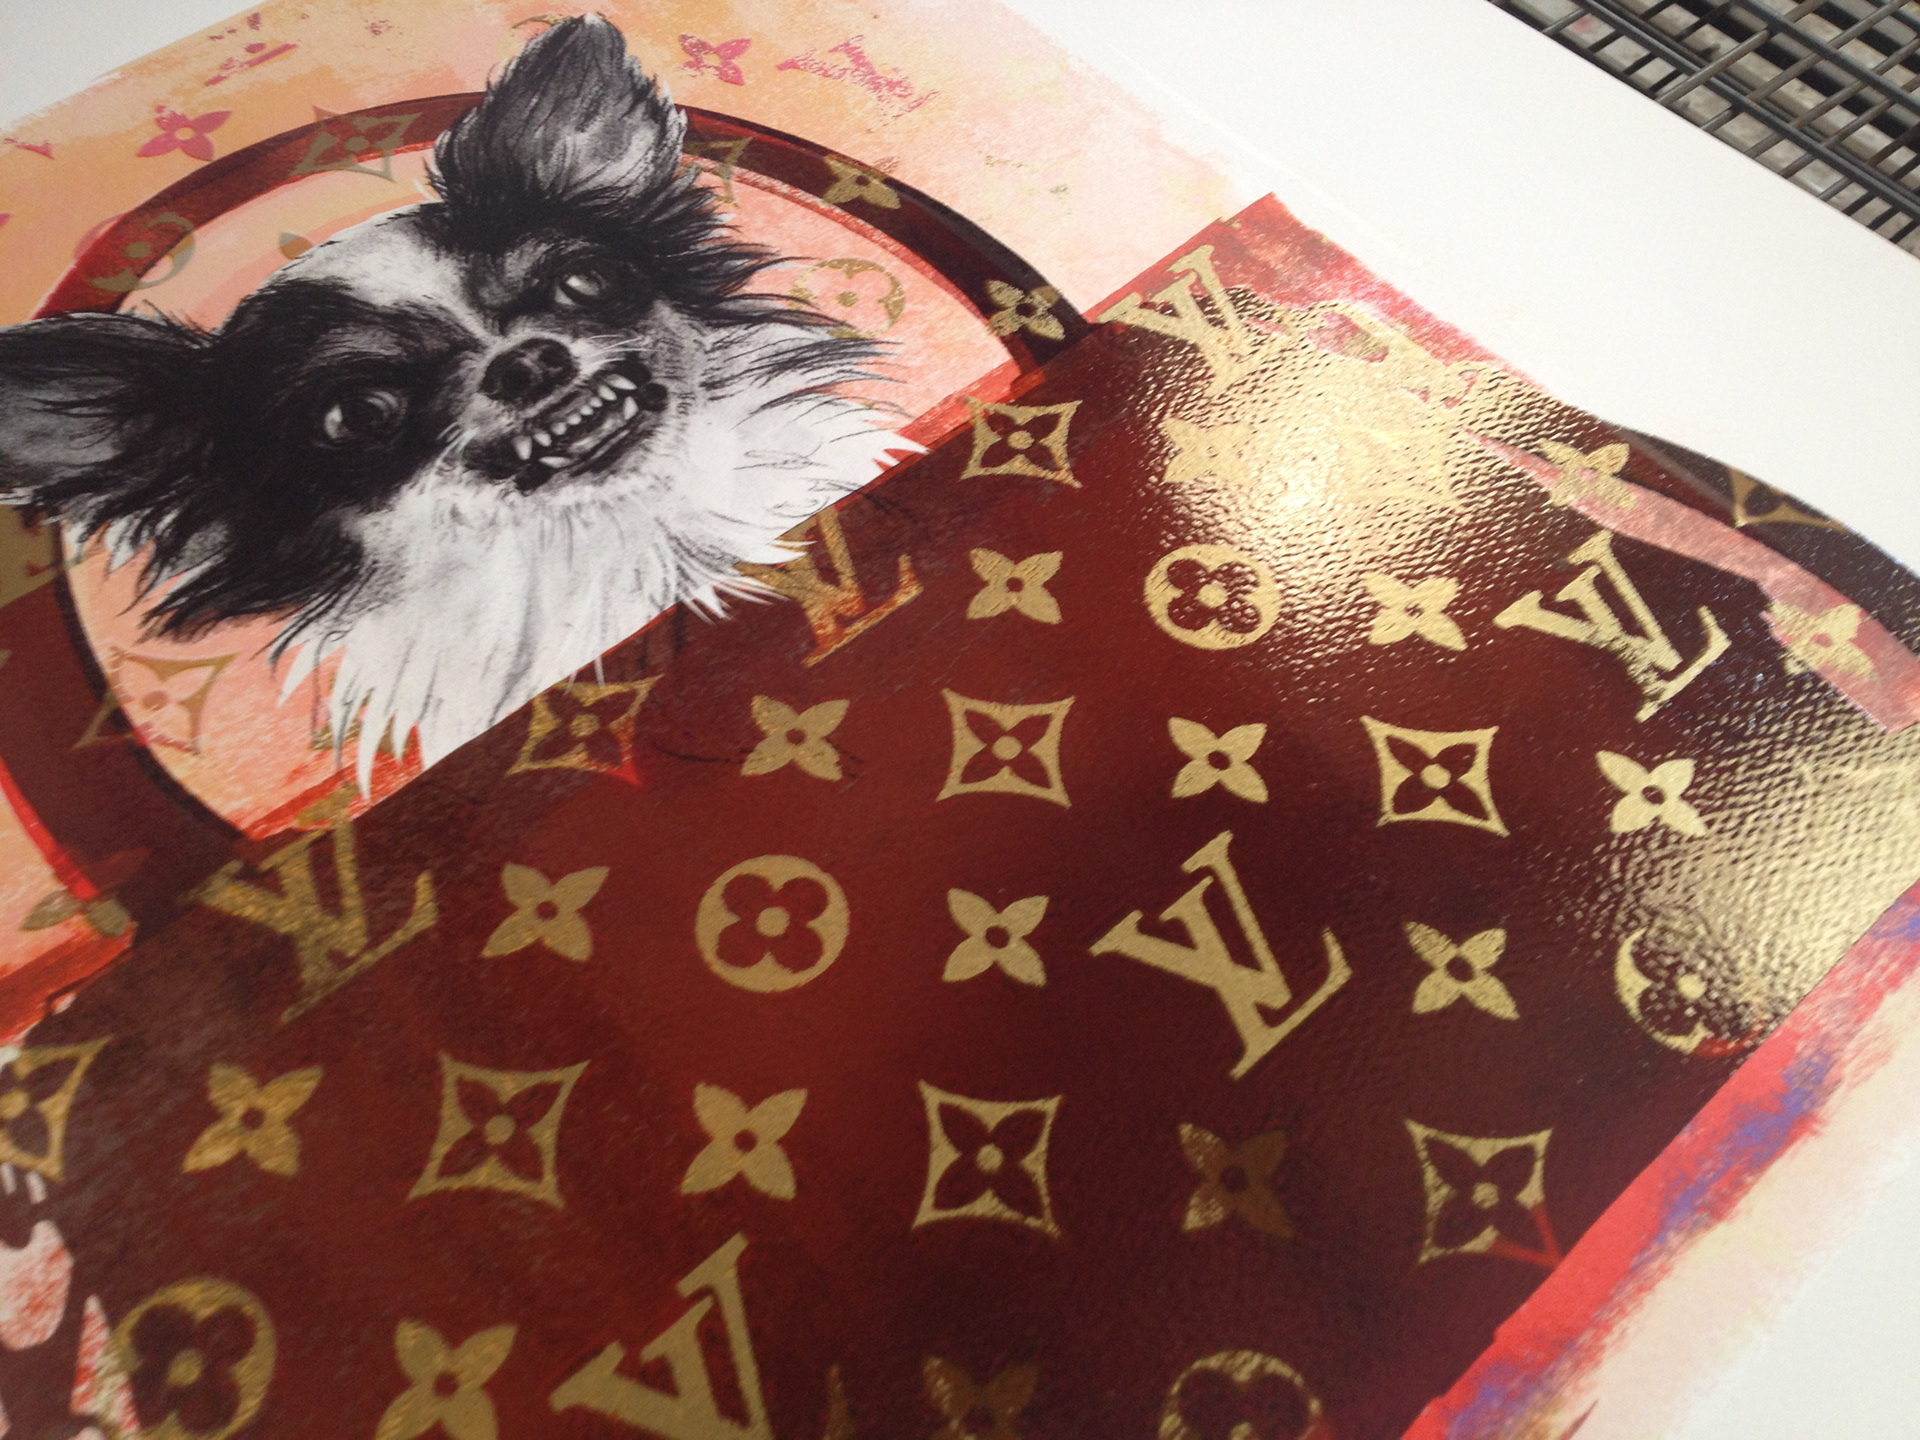 Muse & Doodle - Chihuahua Drawing - for 'Louis Vuitton Dog' print